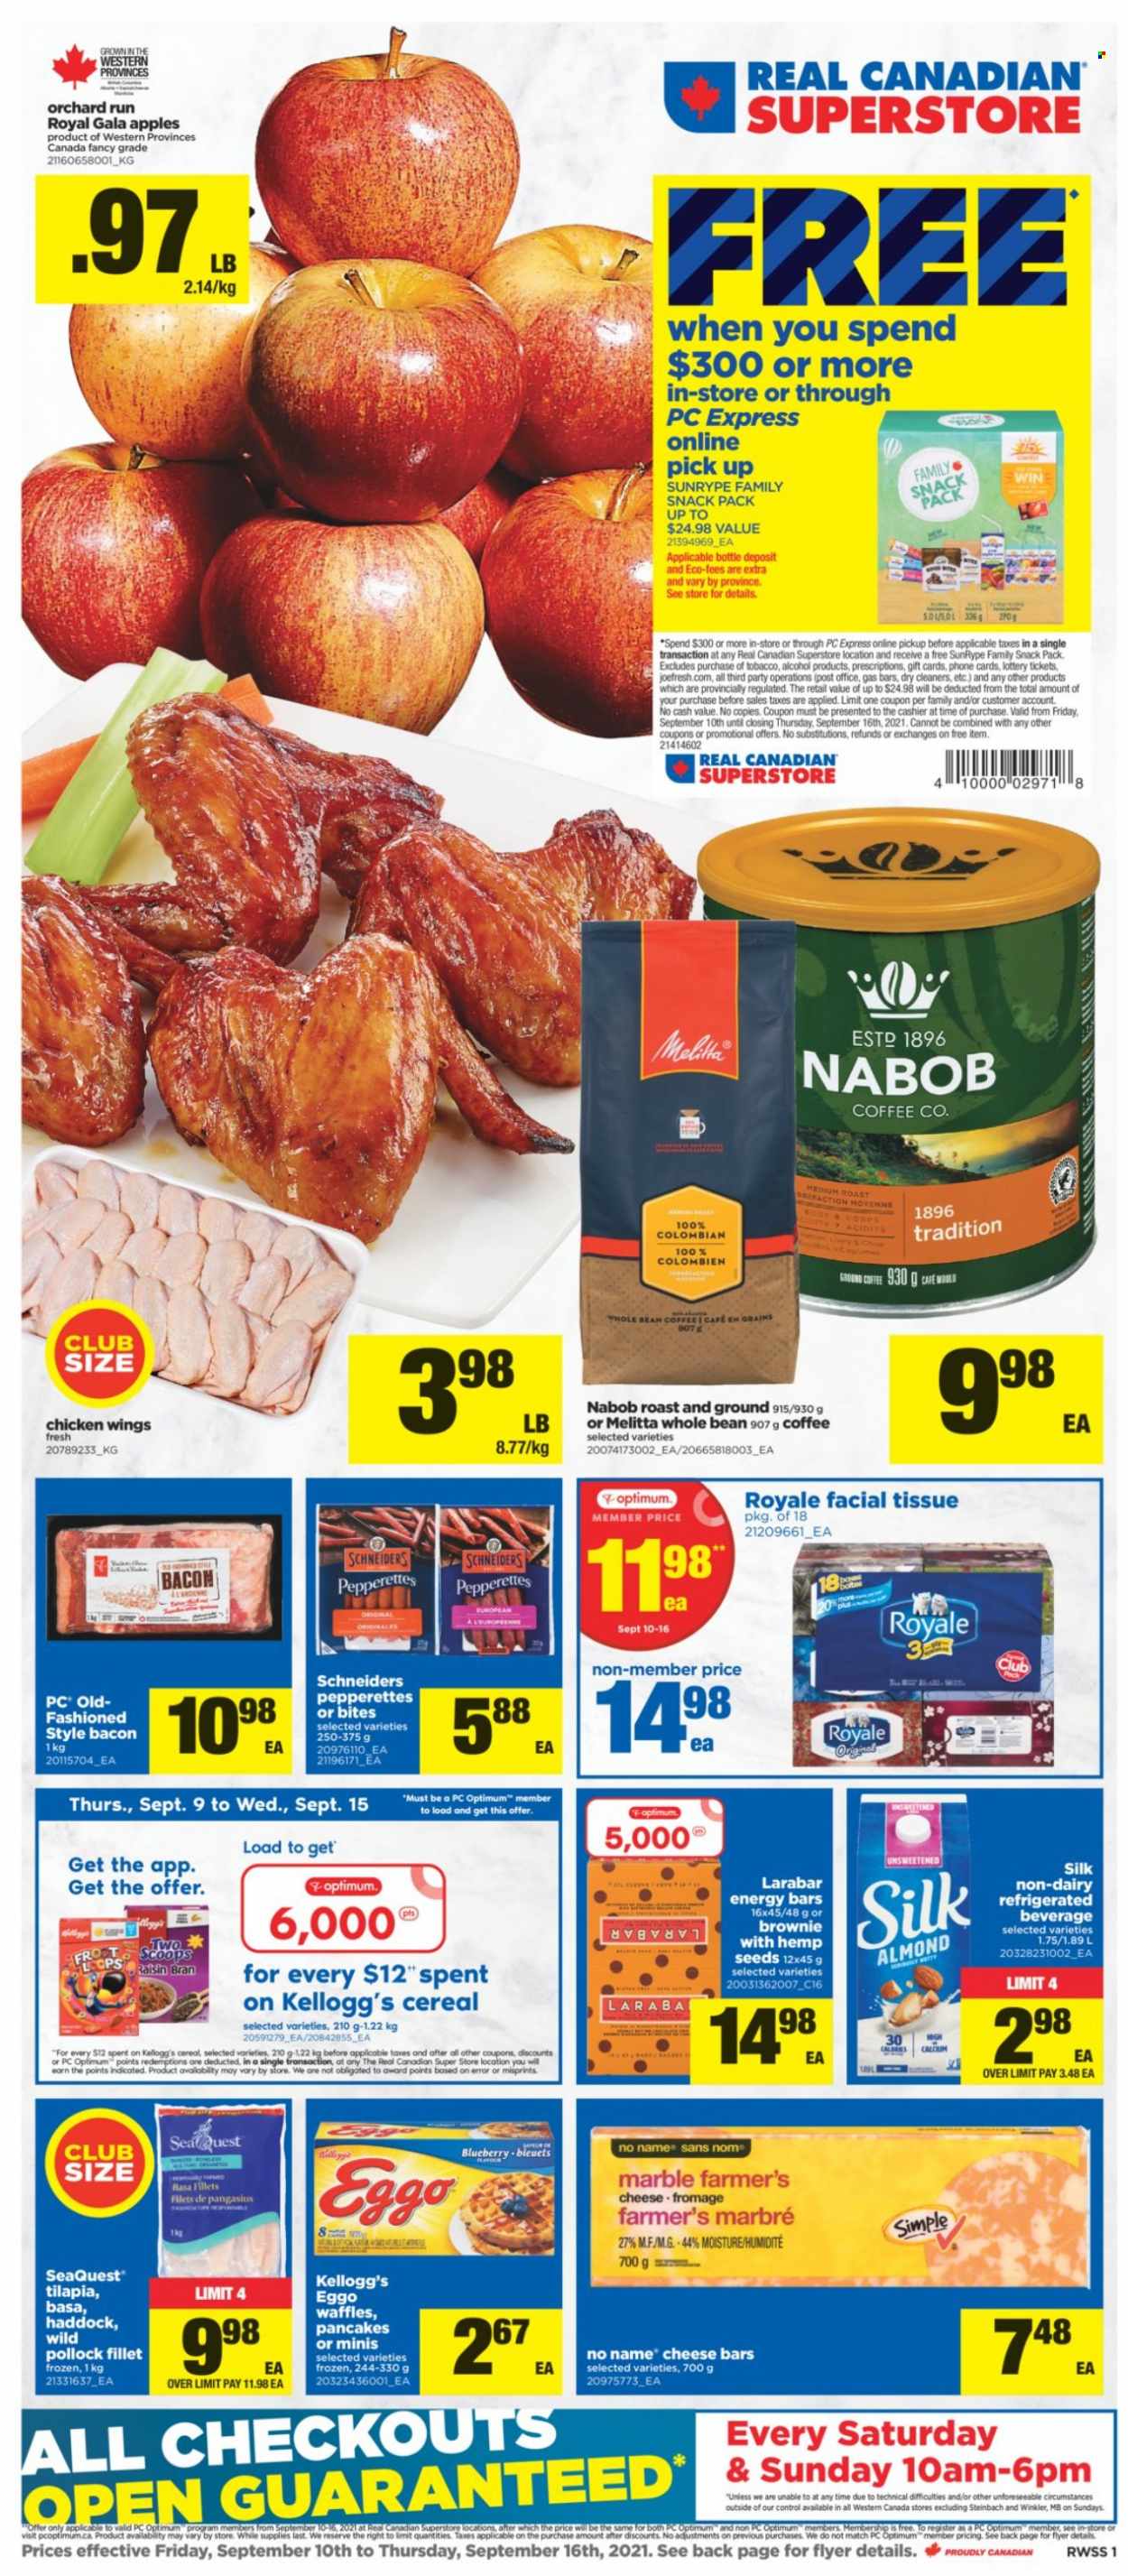 thumbnail - Real Canadian Superstore Flyer - September 10, 2021 - September 16, 2021 - Sales products - brownies, waffles, apples, Gala, tilapia, haddock, pollock, No Name, bacon, cheese, Silk, chicken wings, Kellogg's, cereals, energy bar, coffee, tissues, Optimum. Page 1.